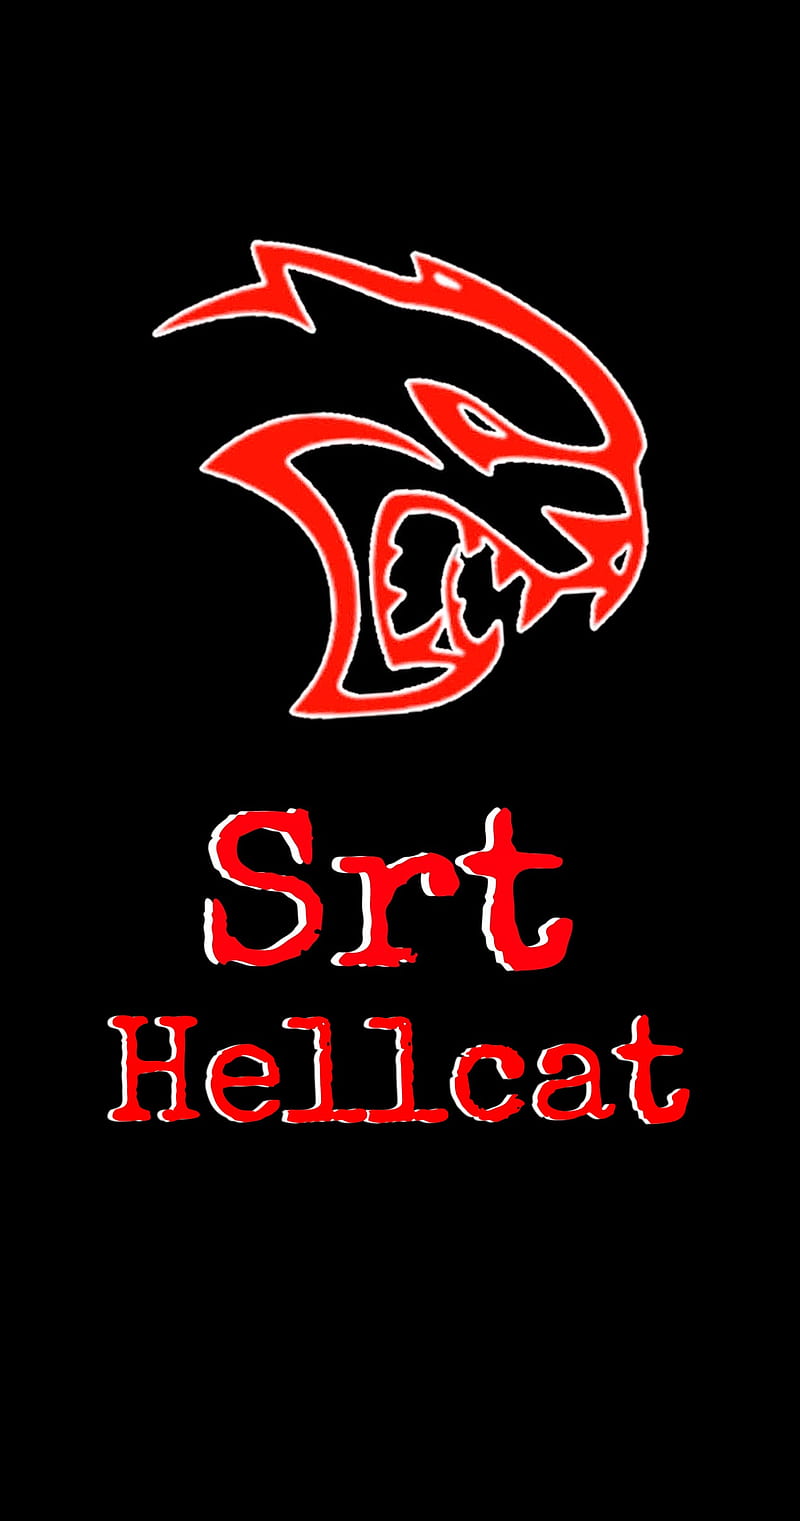 Download Logo Hellcat Picture Free PNG HQ HQ PNG Image  FreePNGImg